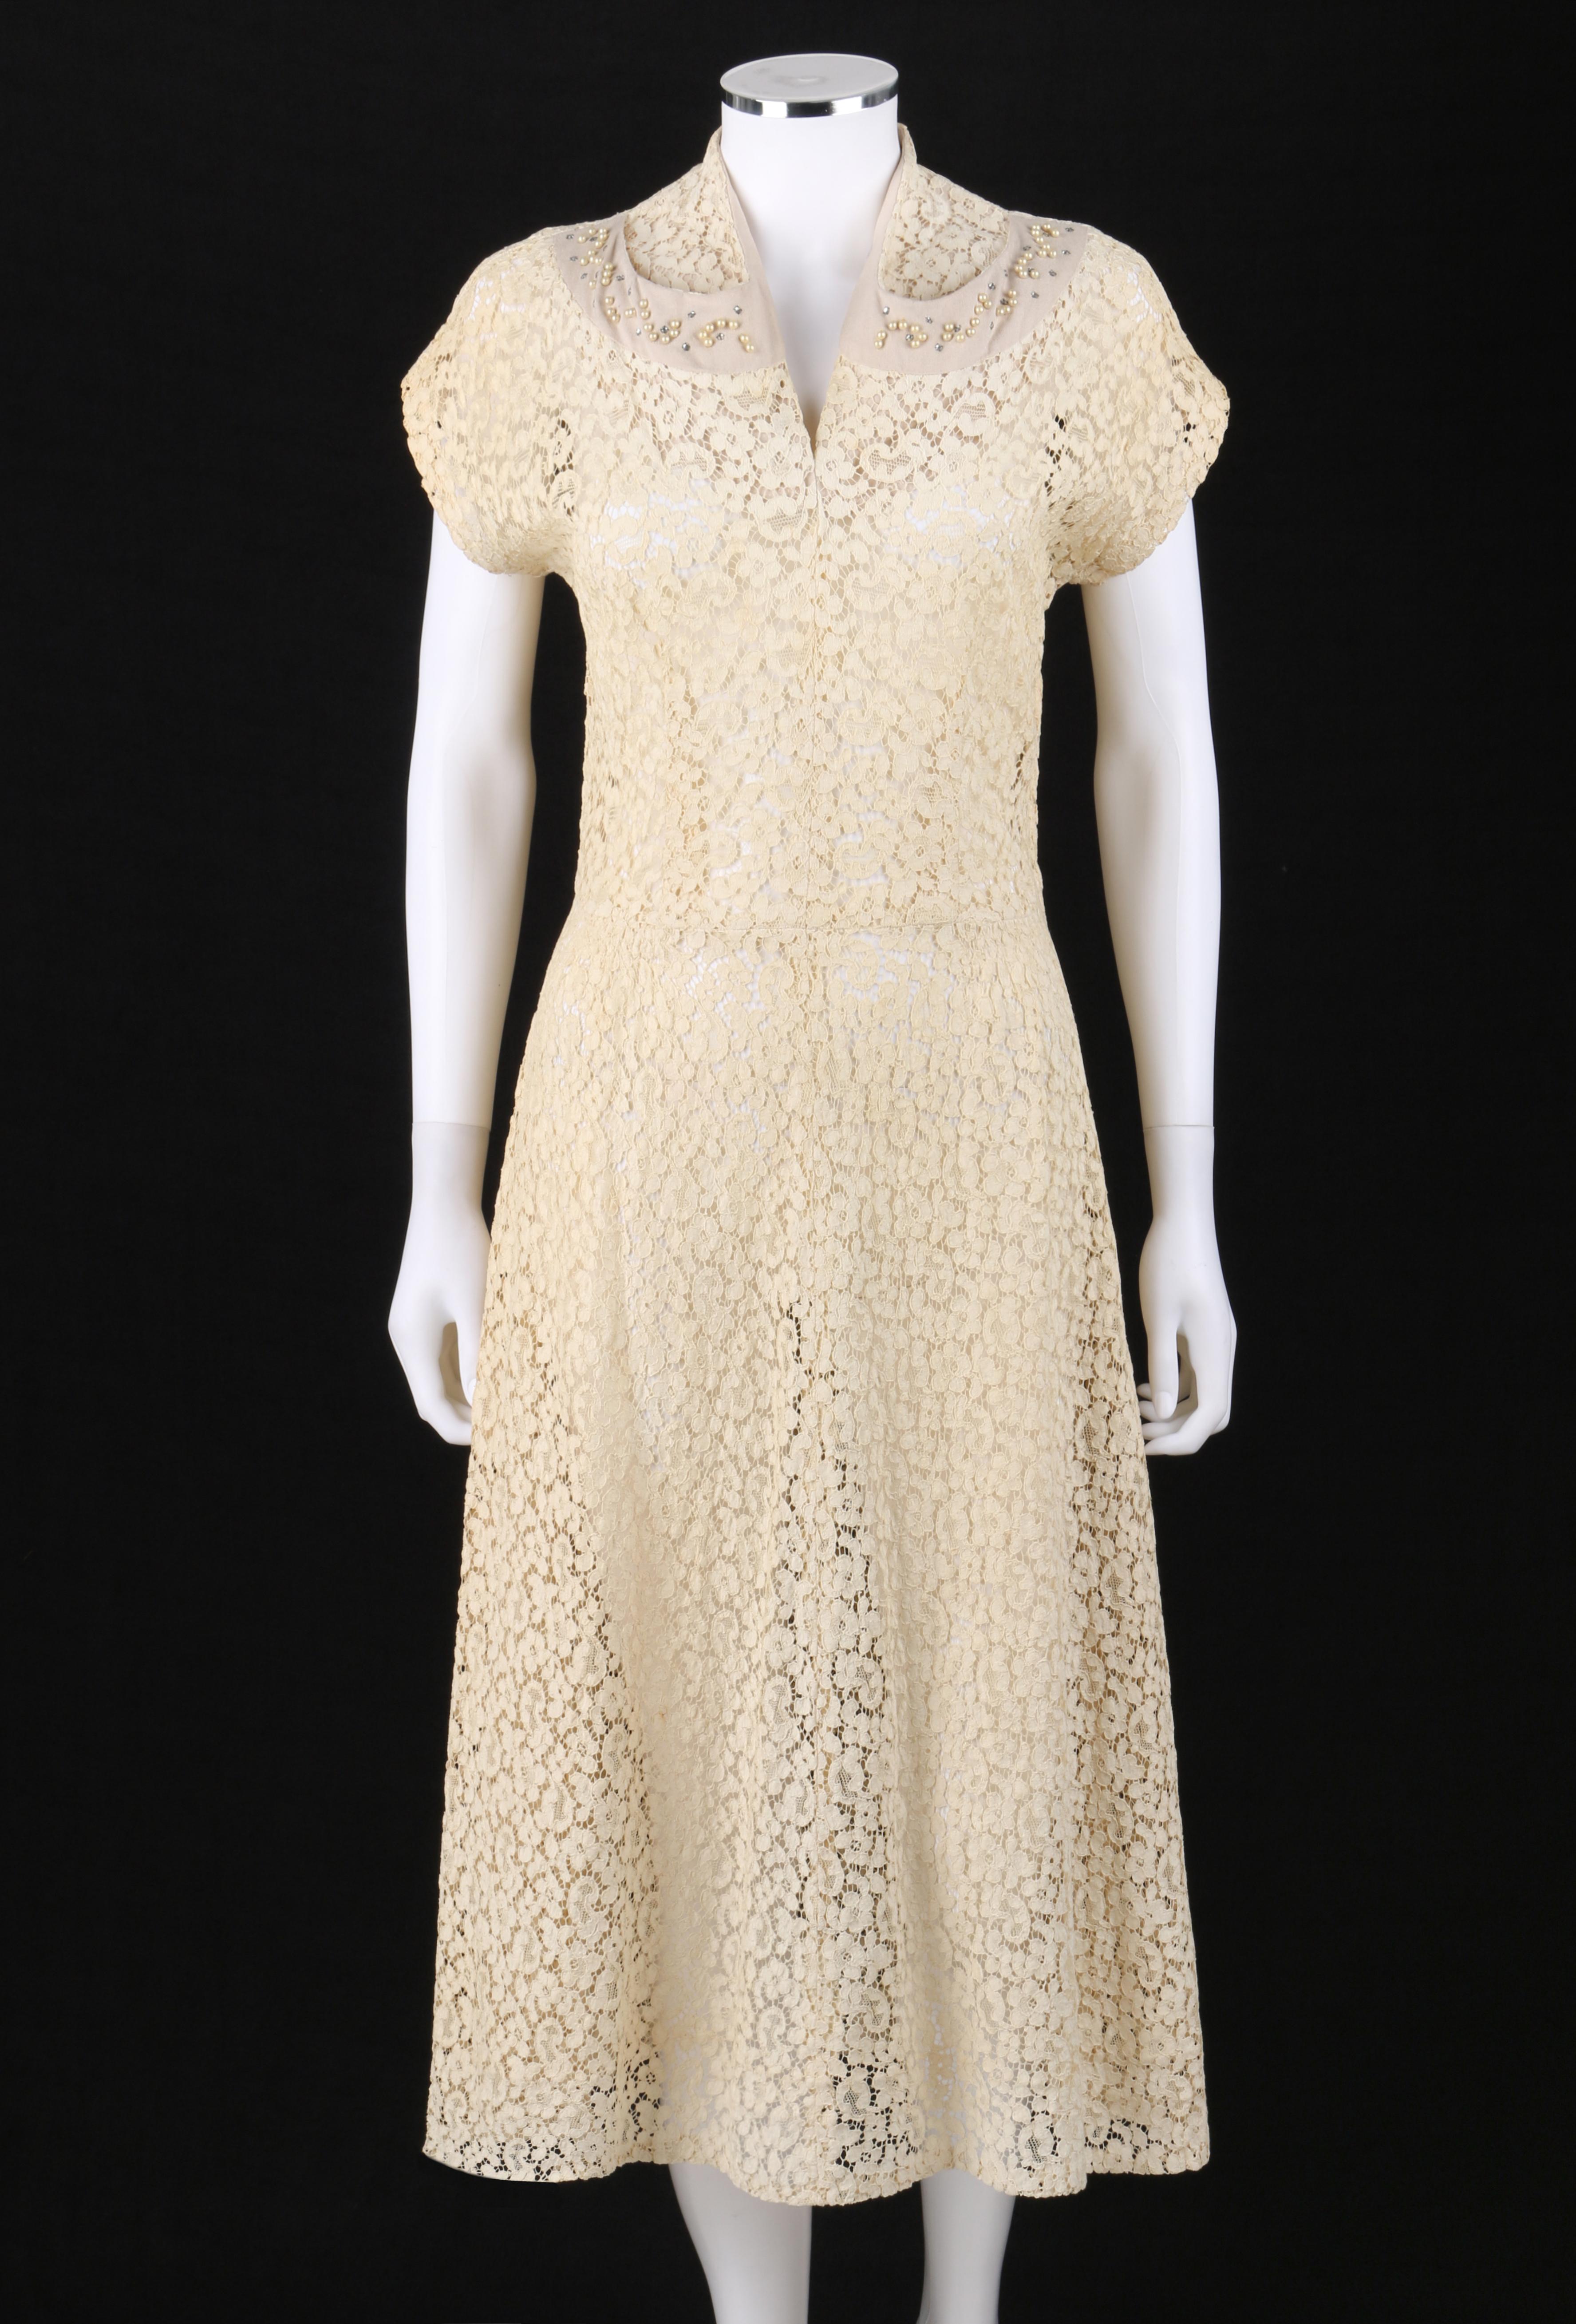 VINTAGE c.1940’s Ivory Tan Cotton Lace Beaded Applique Vent V-Neck Midi Dress  
 
Circa: 1940’s
Label(s): None
Style: Midi dress
Color(s): Shades of ivory and tan 
Lined: No 
Unmarked Fabric Content (feel of): Cotton 
Additional Details /